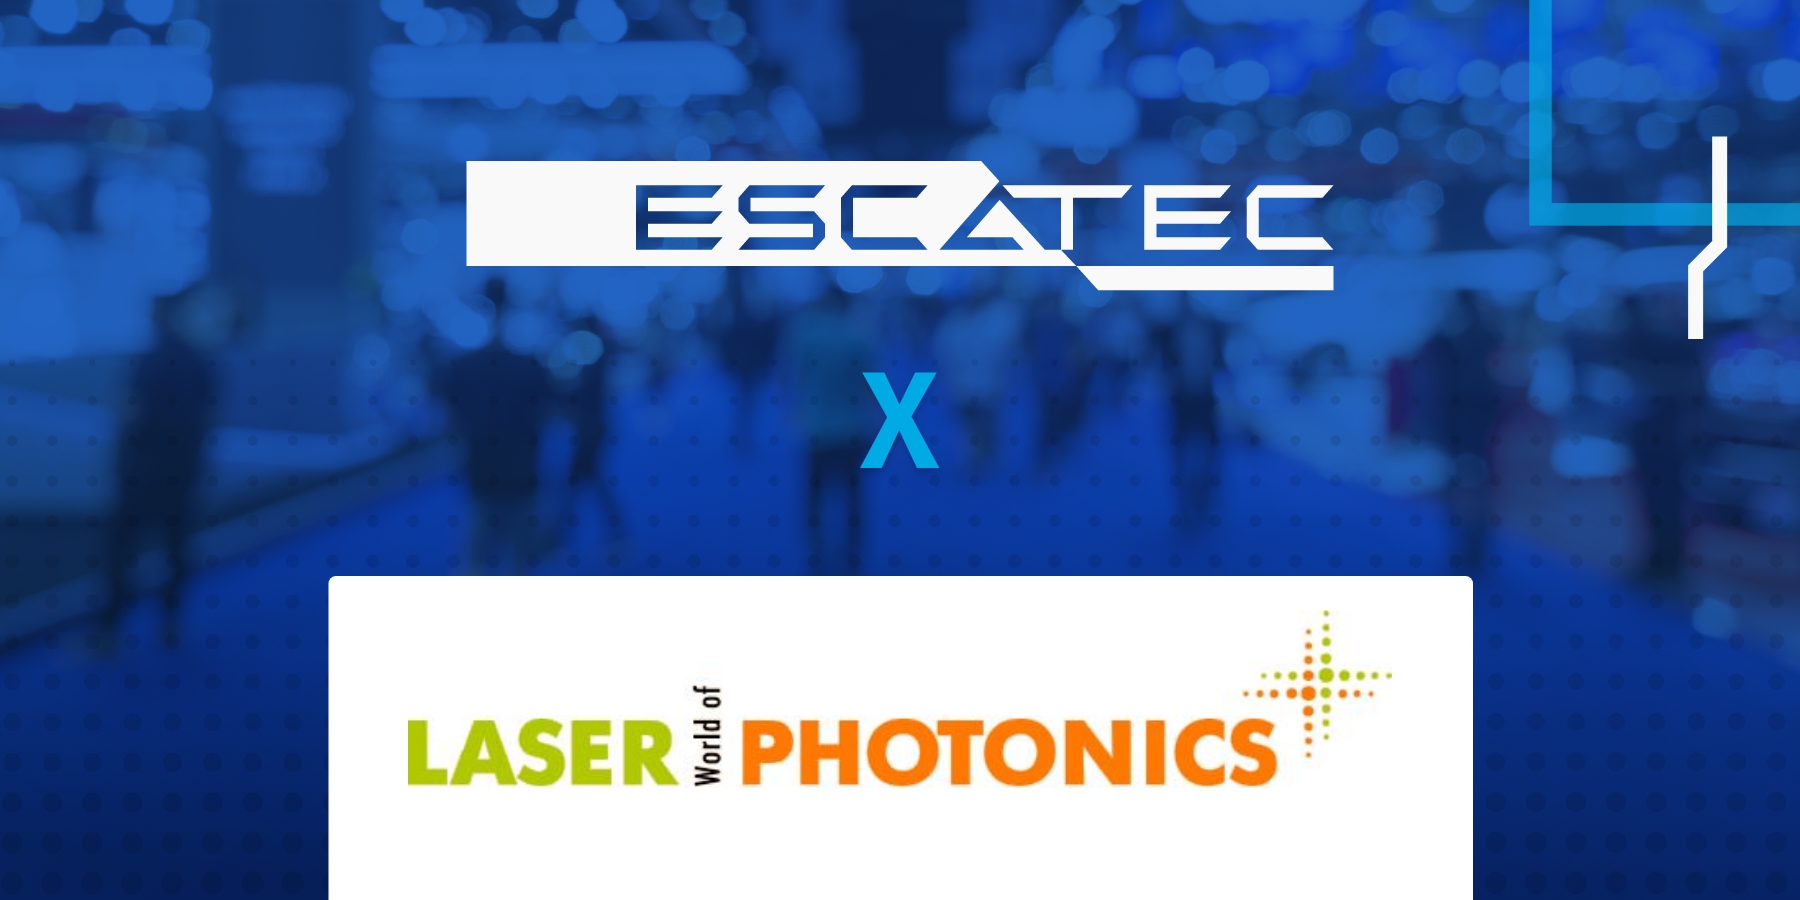 LASER World of PHOTONICS - what is it and why should you go?